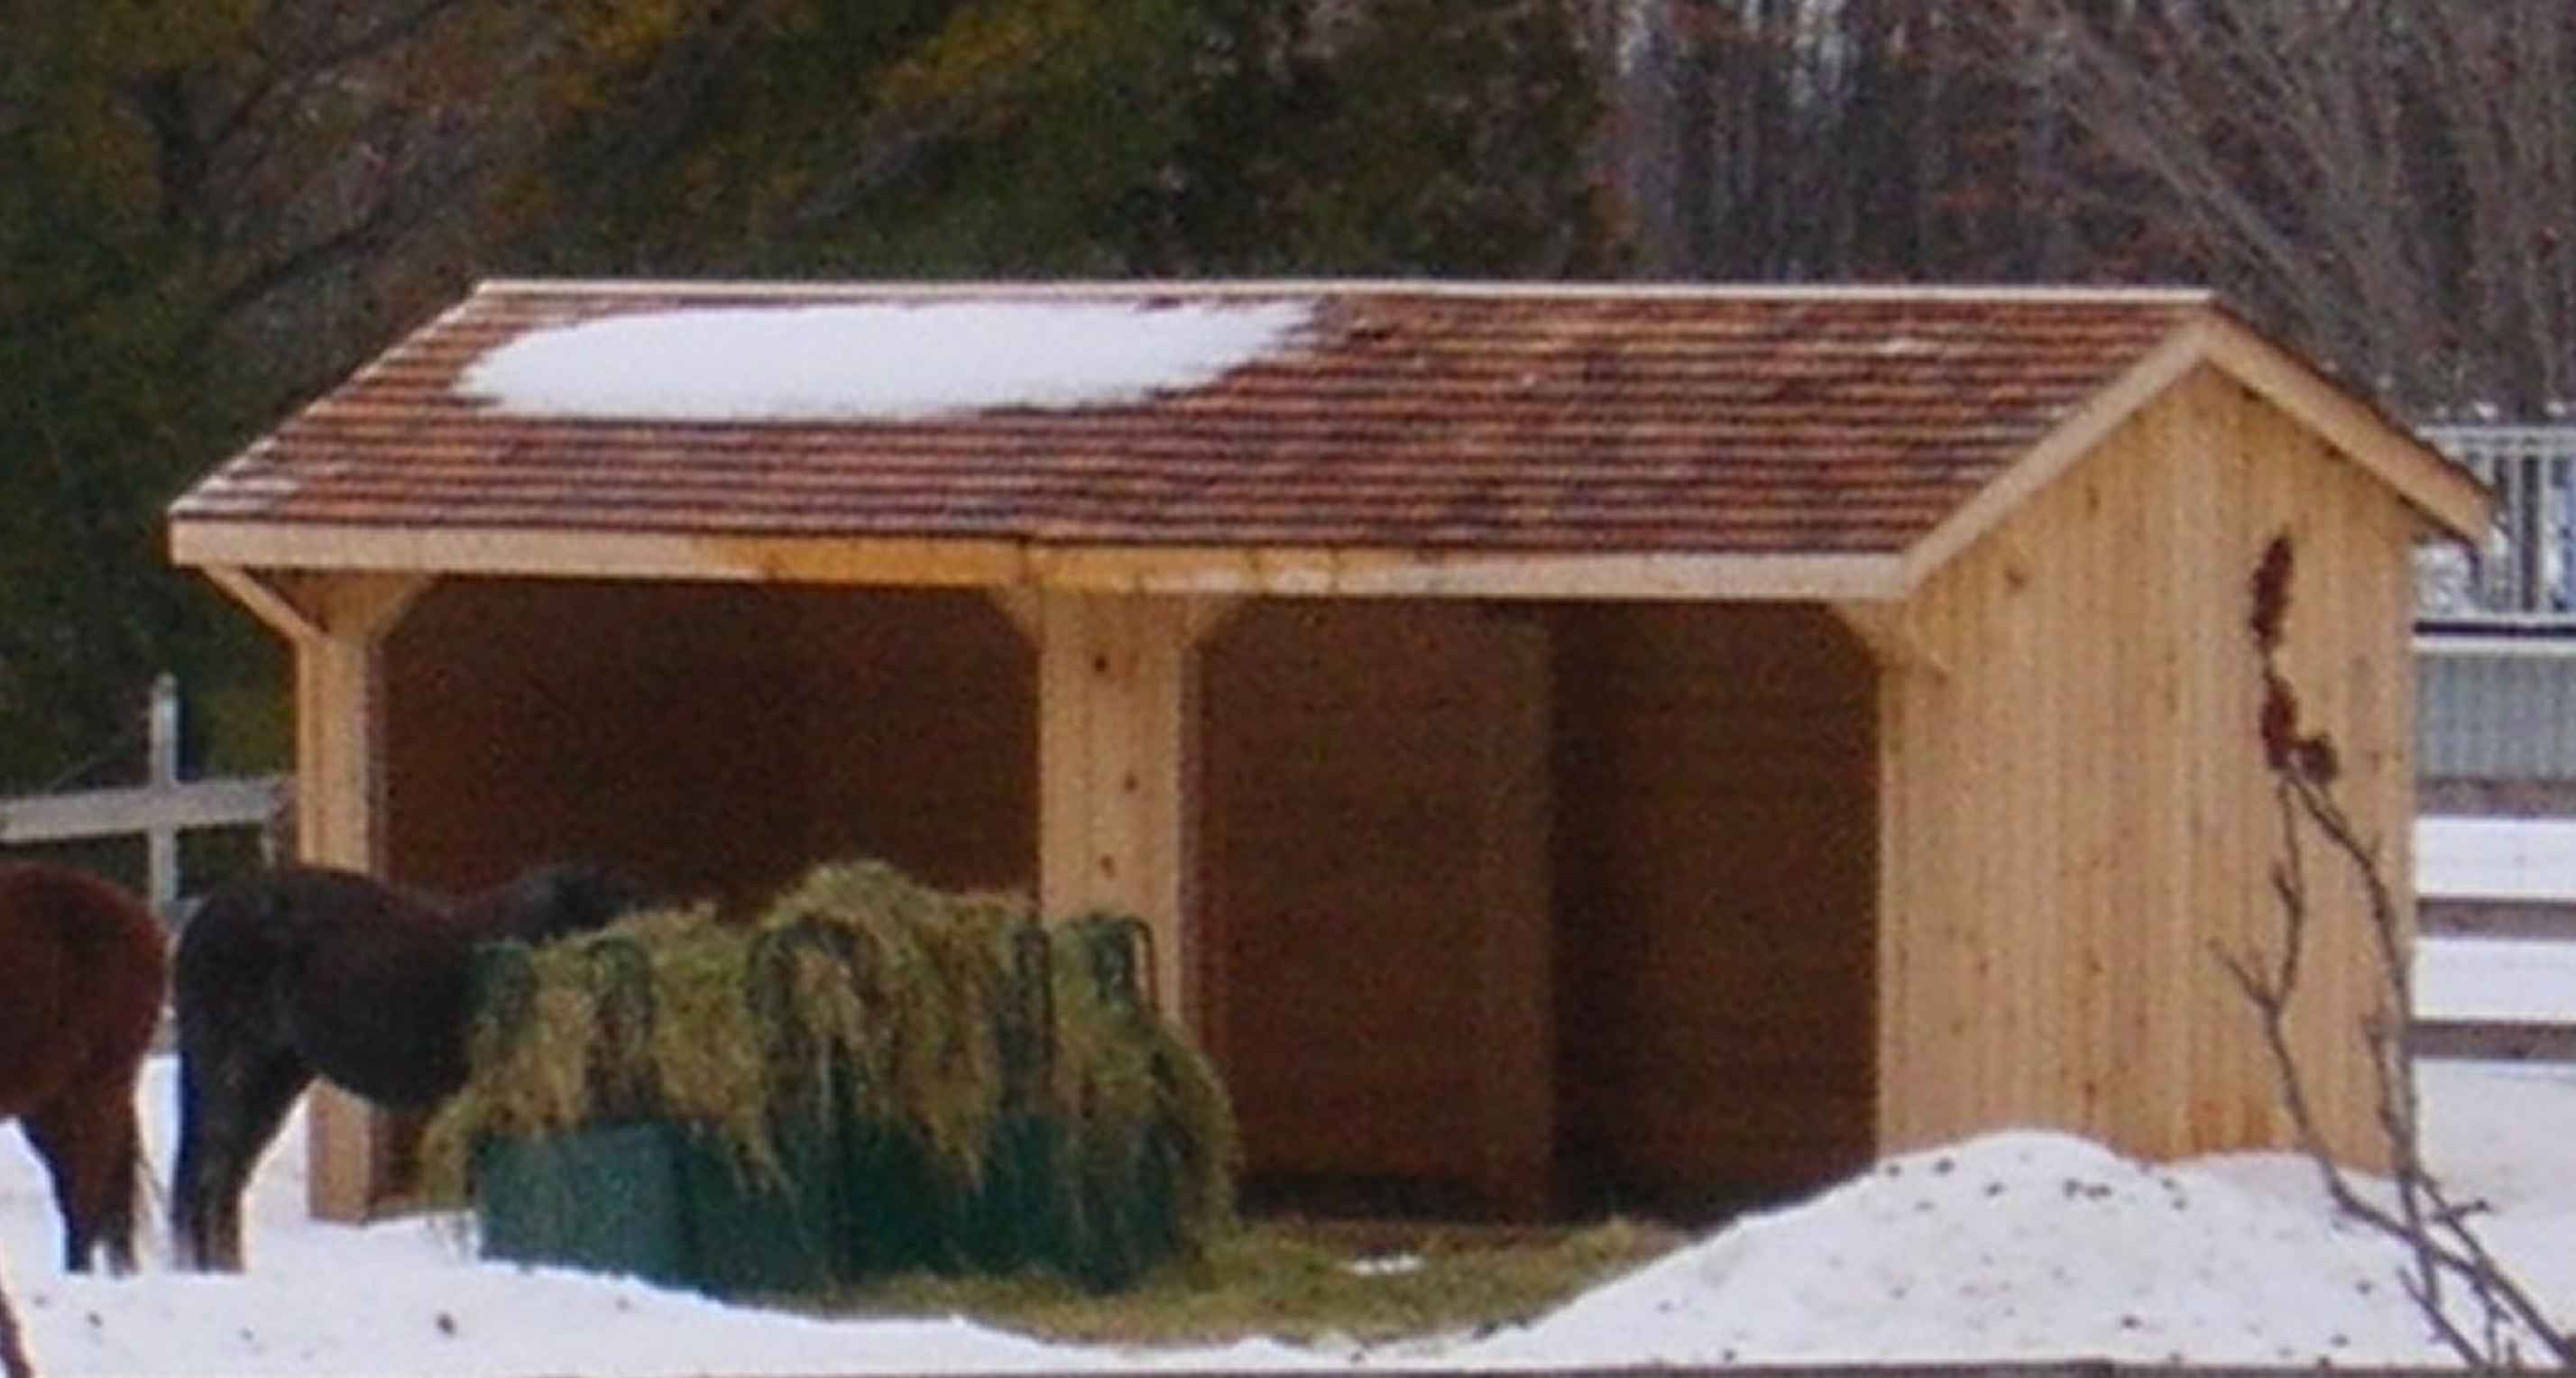 horse run in shed plans free how to build diy by